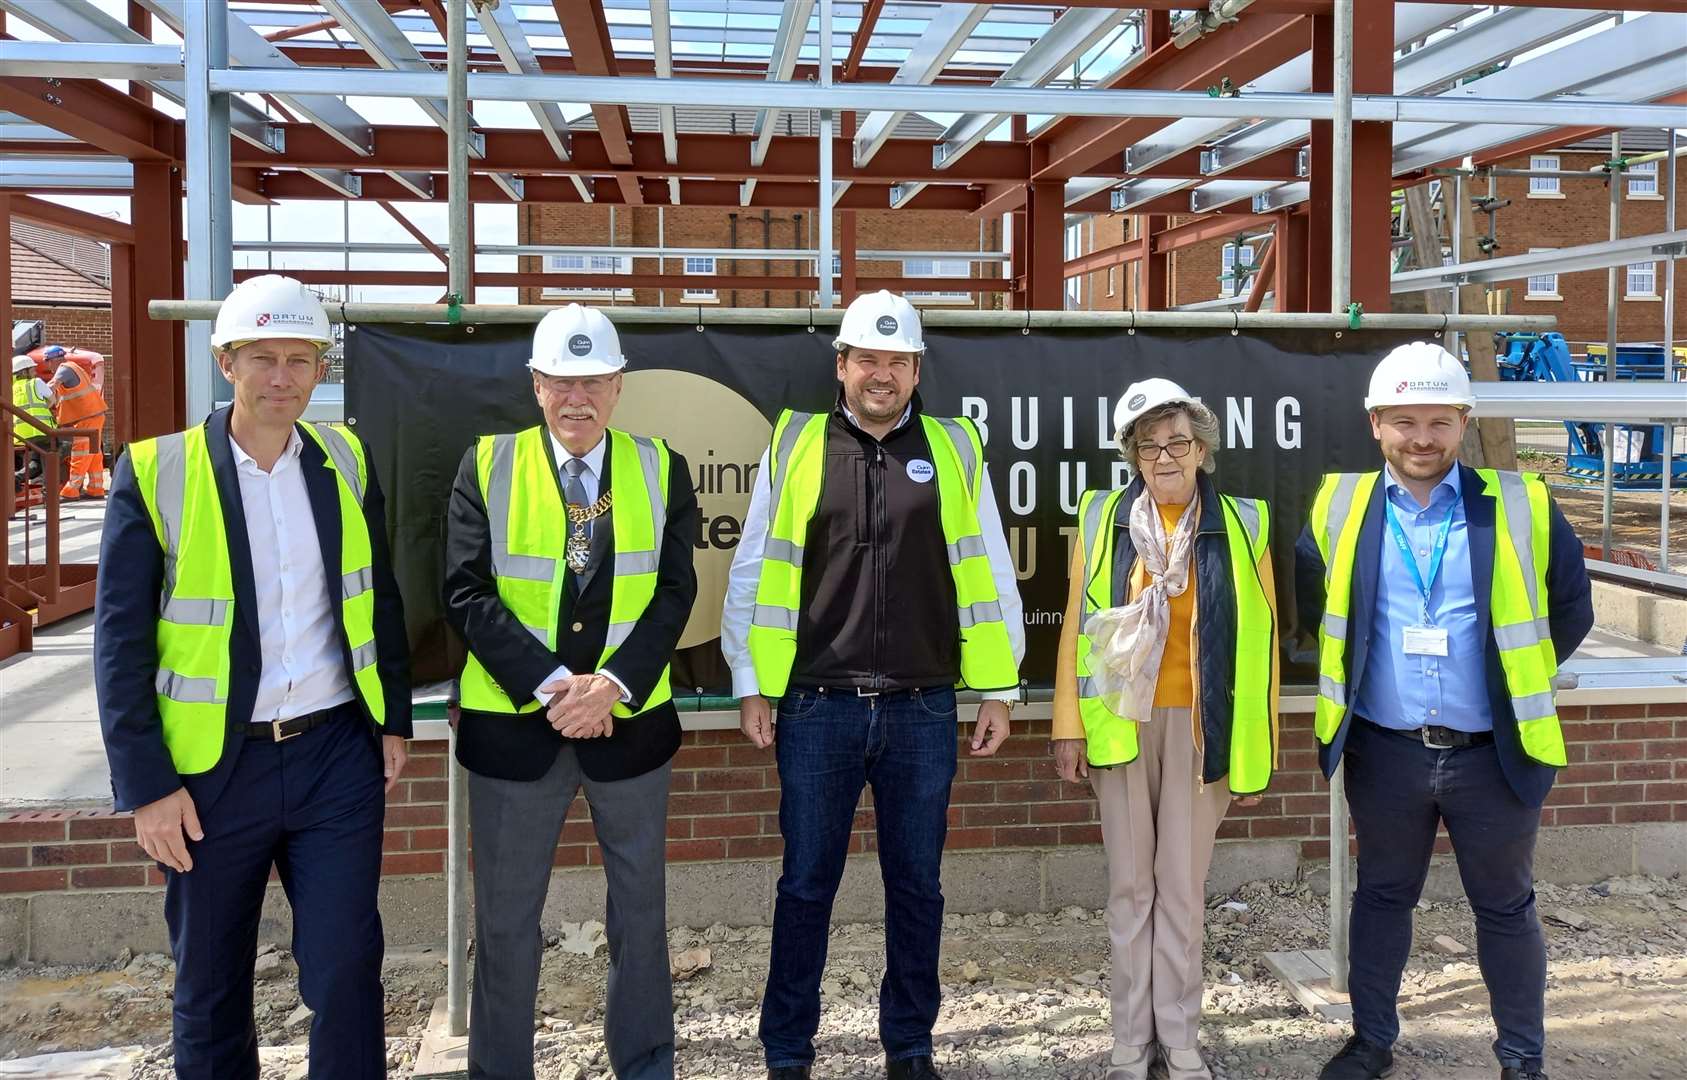 The Lord Mayor of Canterbury, Cllr Pat Todd (second from left) with Mark Quinn (centre) and Cllr Georgina Glover (second from right) on a visit to the site. Picture: Quinn Estates